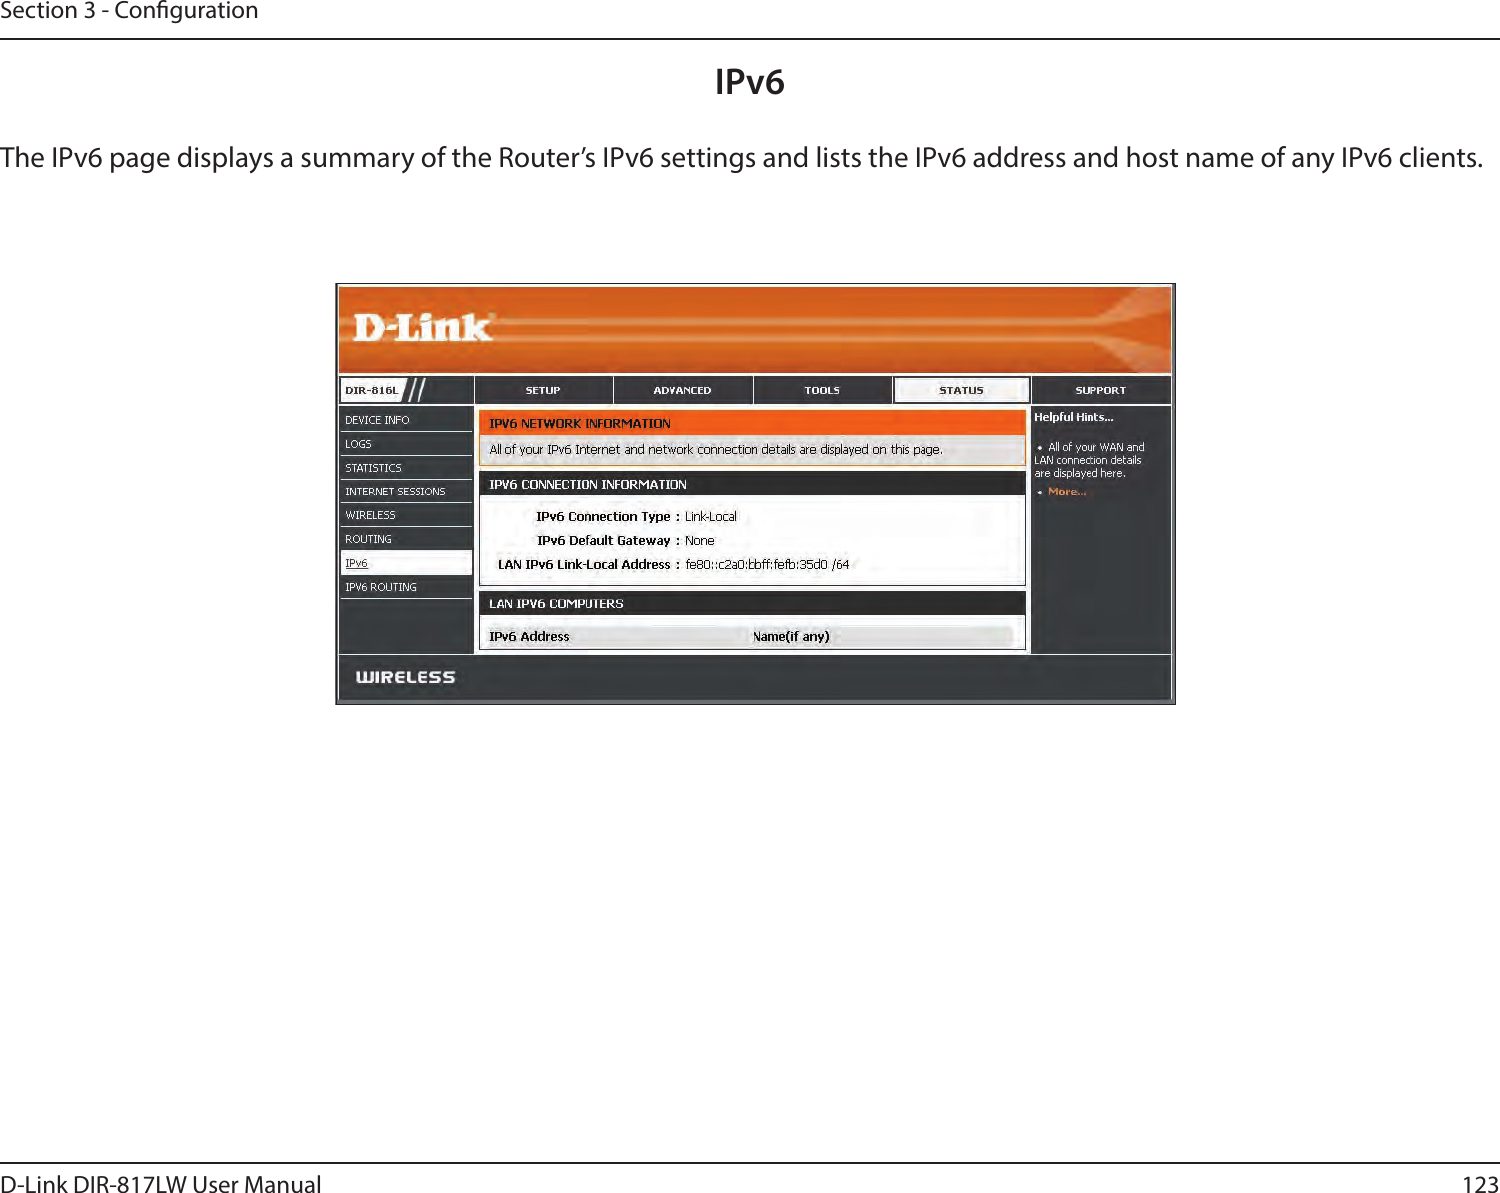 123D-Link DIR-817LW User ManualSection 3 - CongurationIPv6The IPv6 page displays a summary of the Router’s IPv6 settings and lists the IPv6 address and host name of any IPv6 clients. 